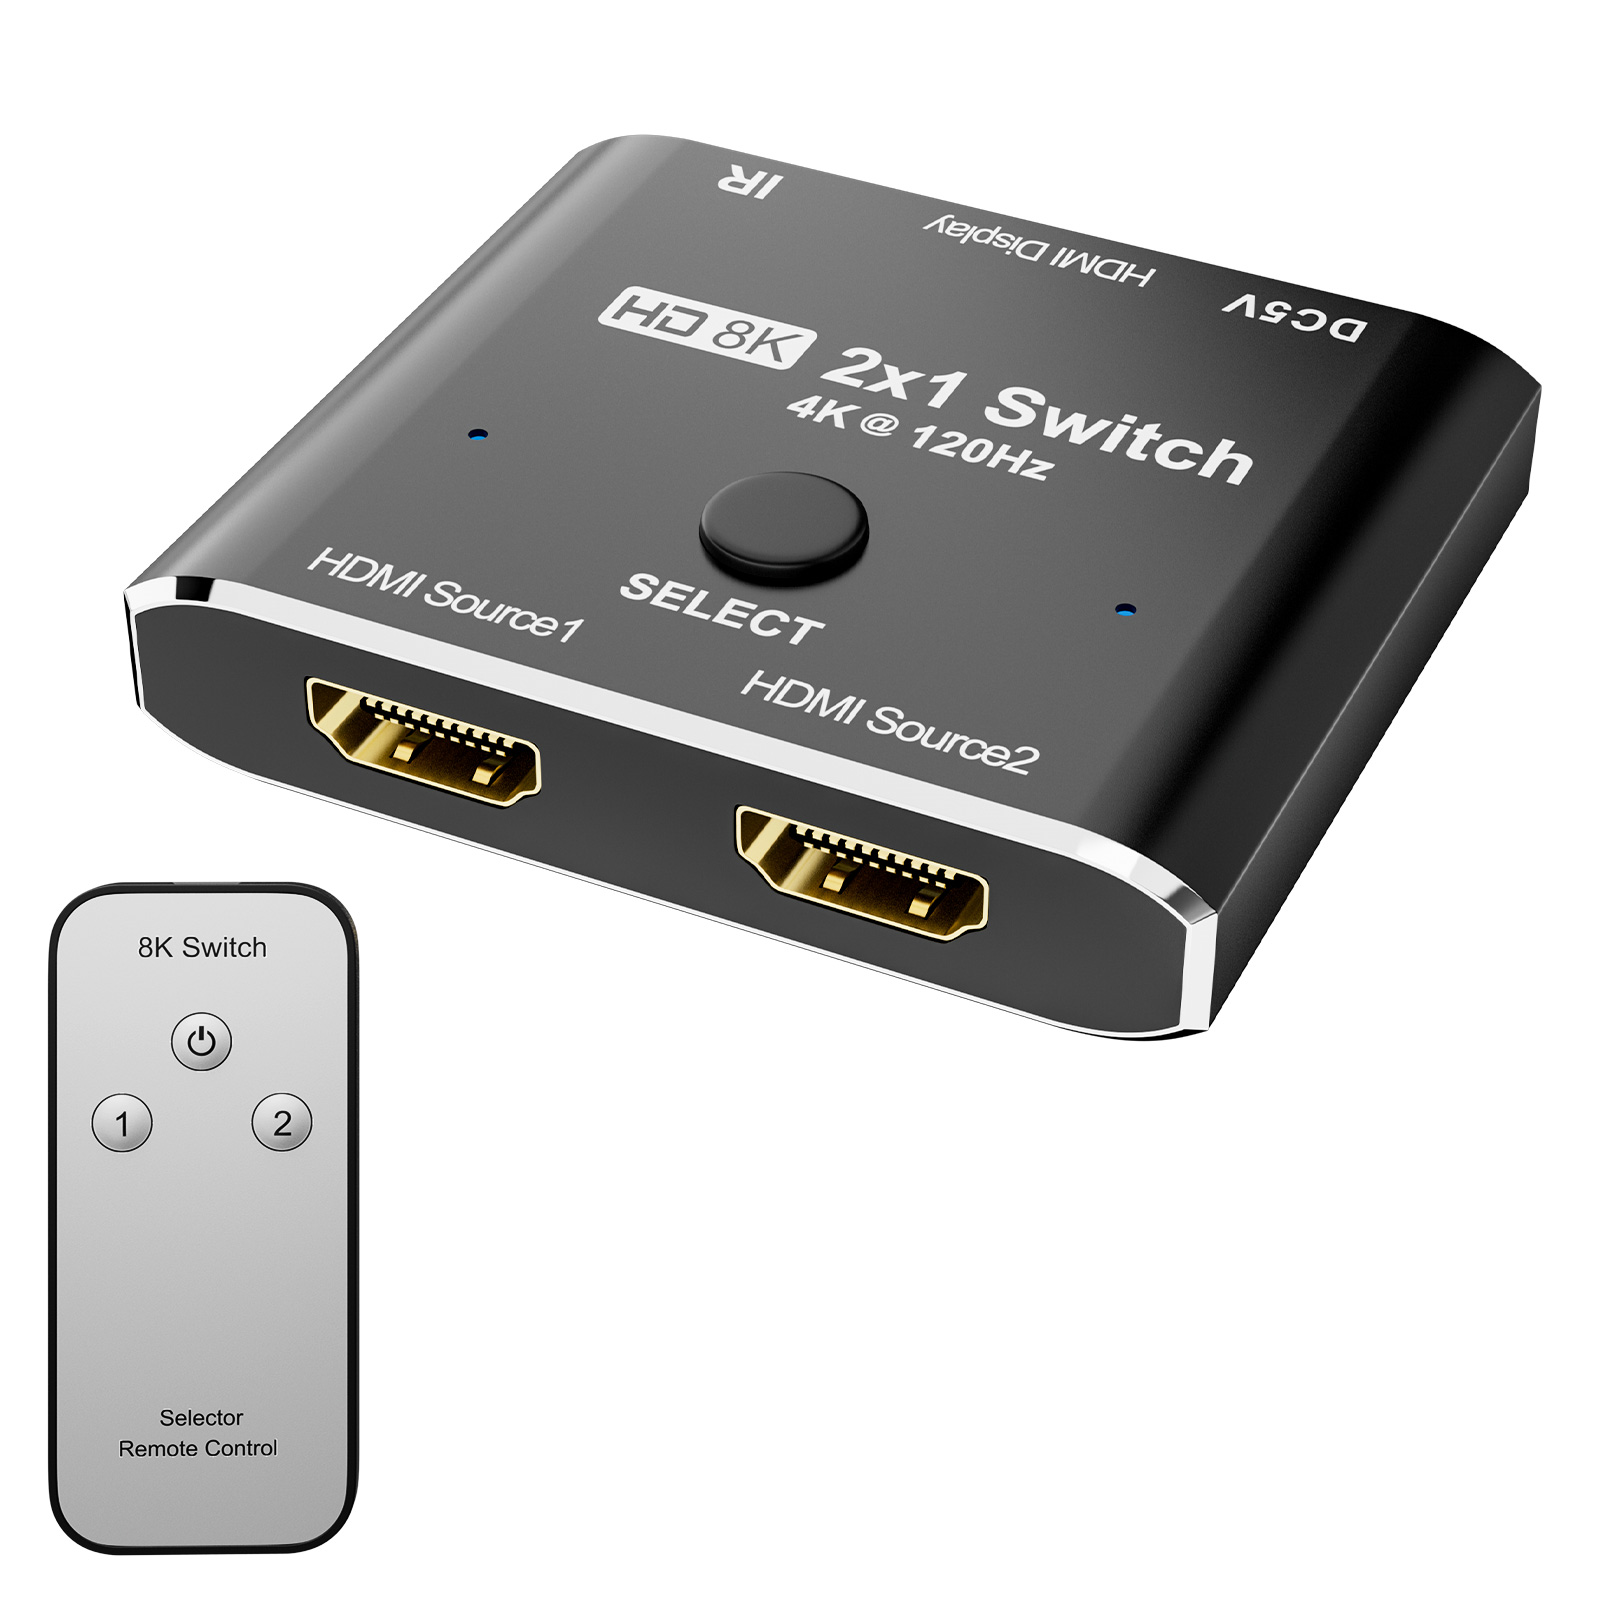 HDMI 2x1 Switch with remote control (2 in - 1 out), 4K UHD, DHCP, 3D